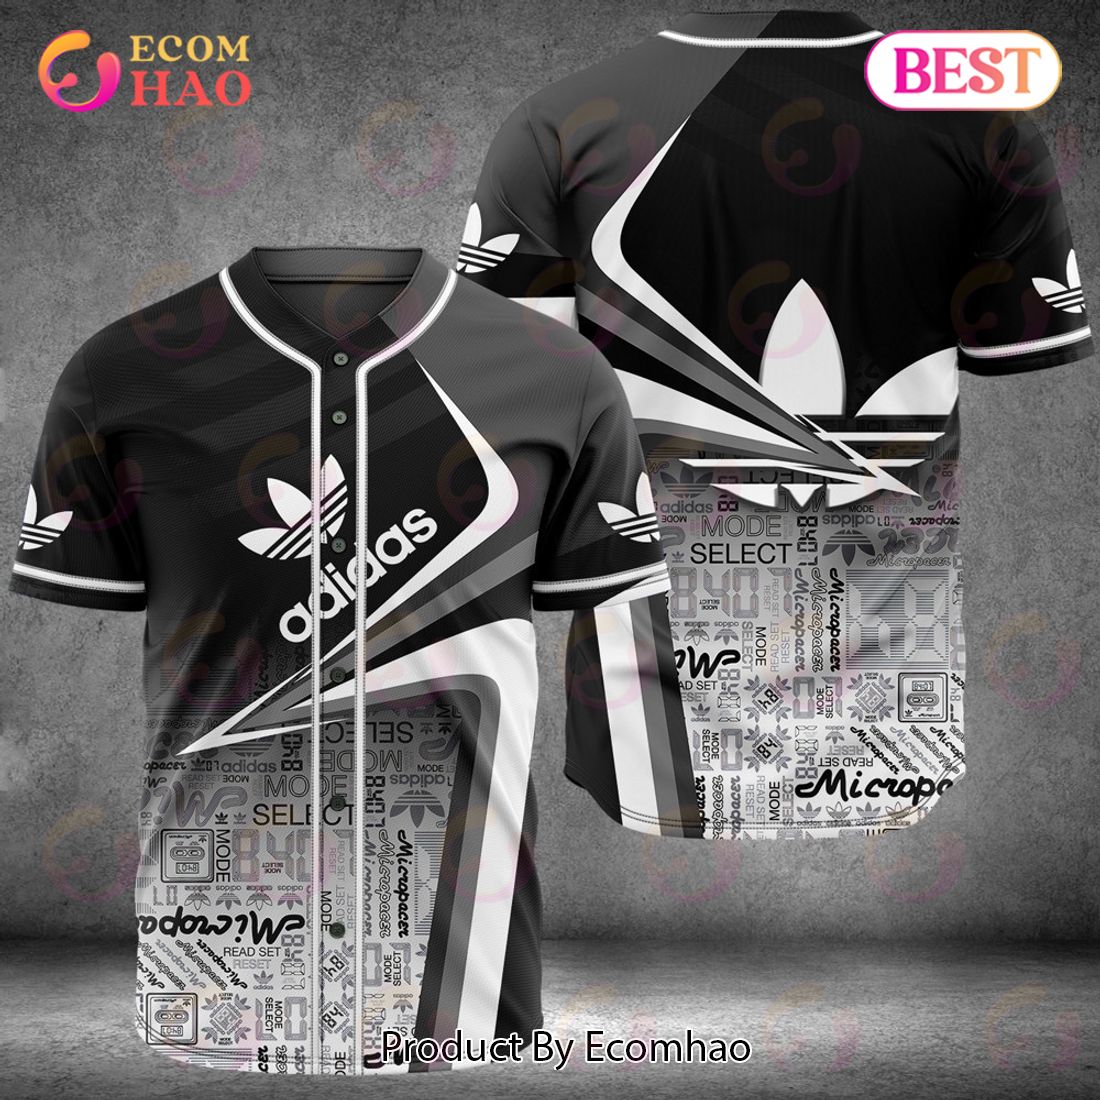 Adidas Ombre Black Grey Printing Patter Luxury Brand Jersey Limited Edition